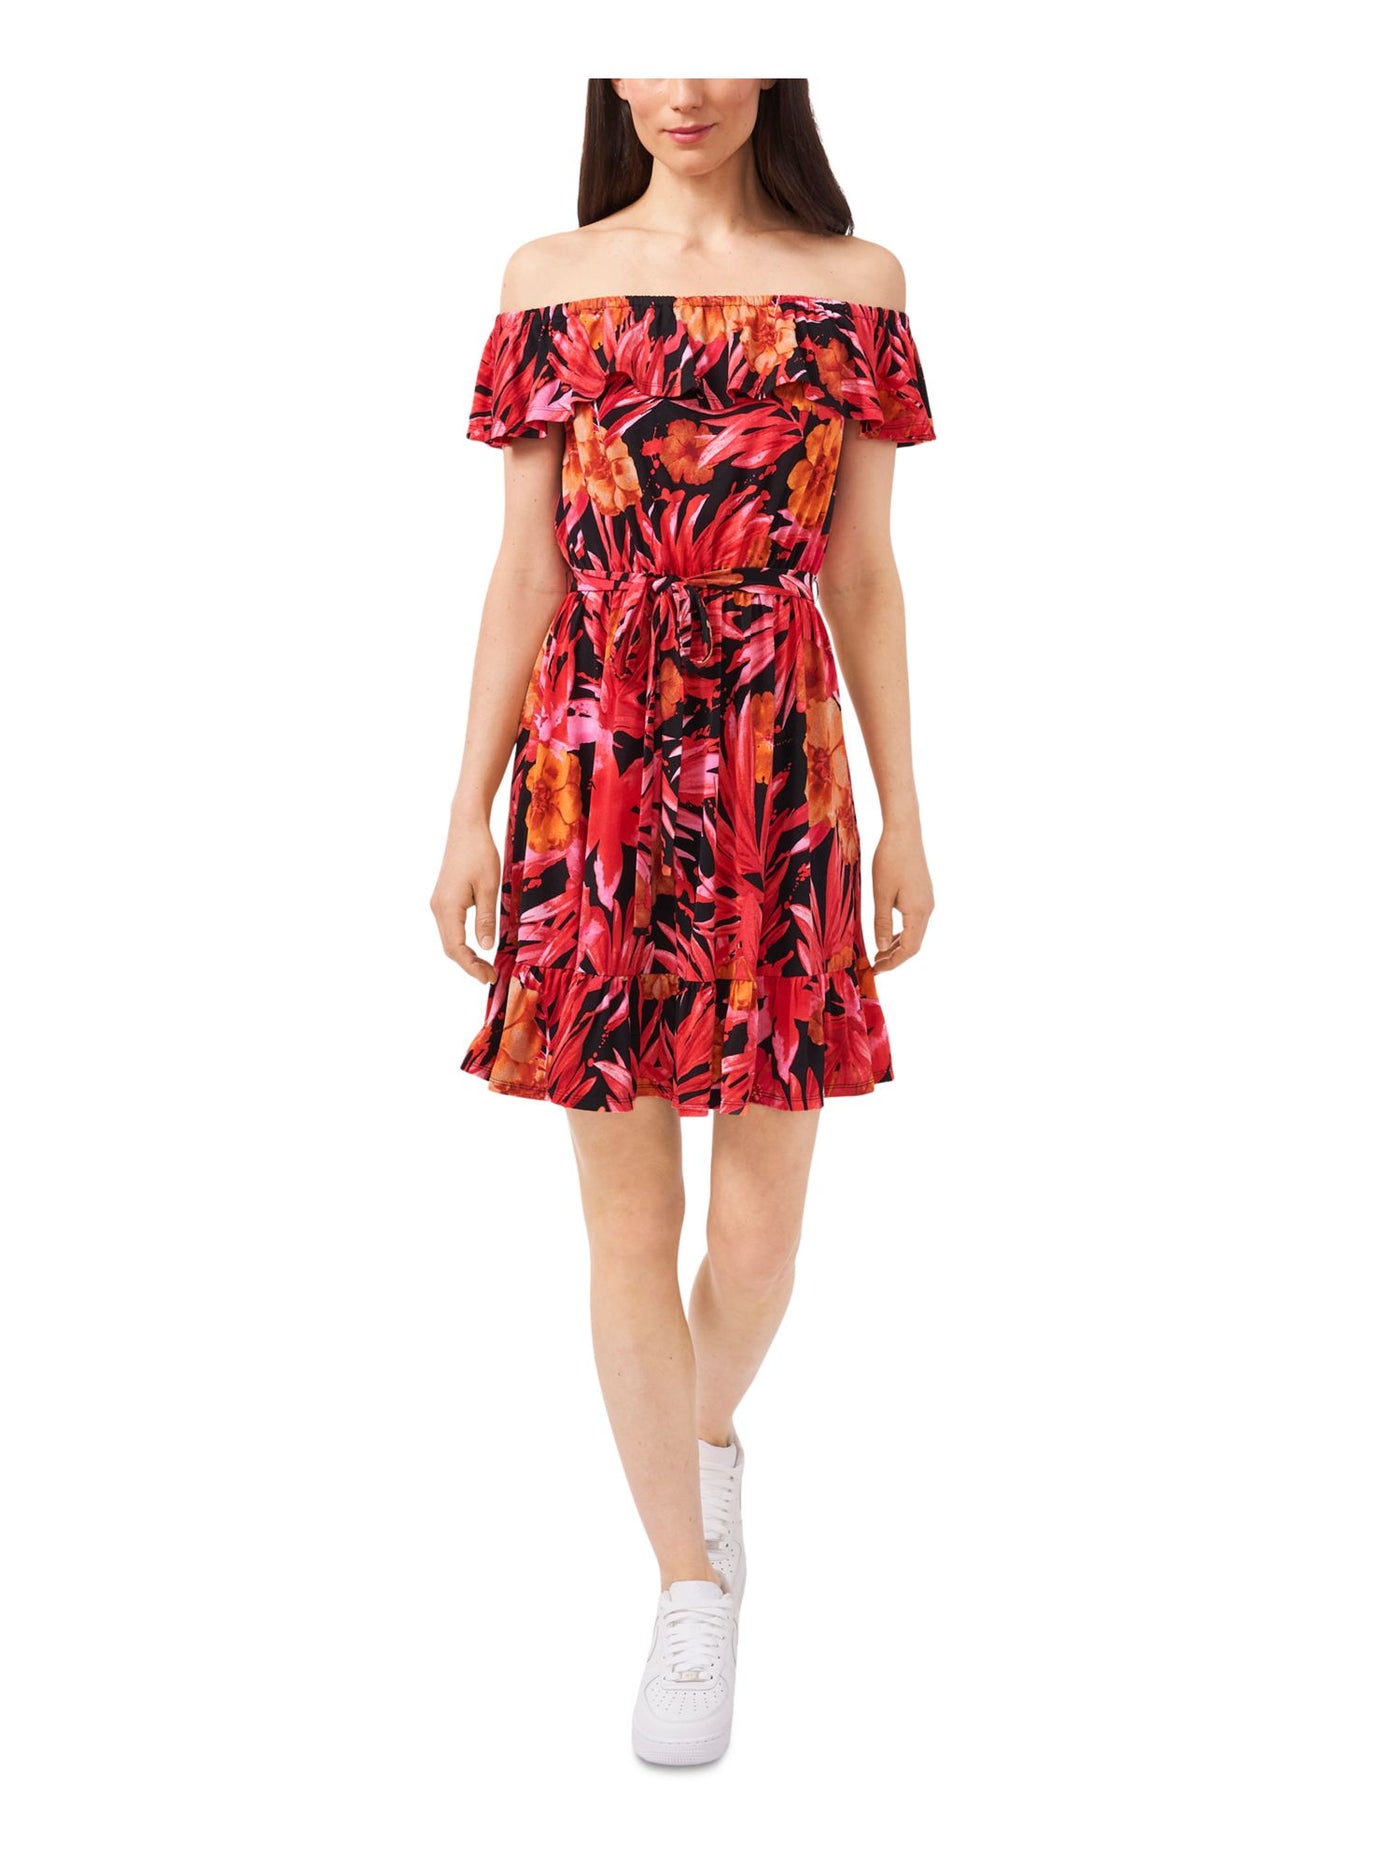 RILEY&RAE Womens Stretch Tie Ruffled Flounce Hem Flutter Sleeve Off Shoulder Above The Knee Party Fit + Flare Dress